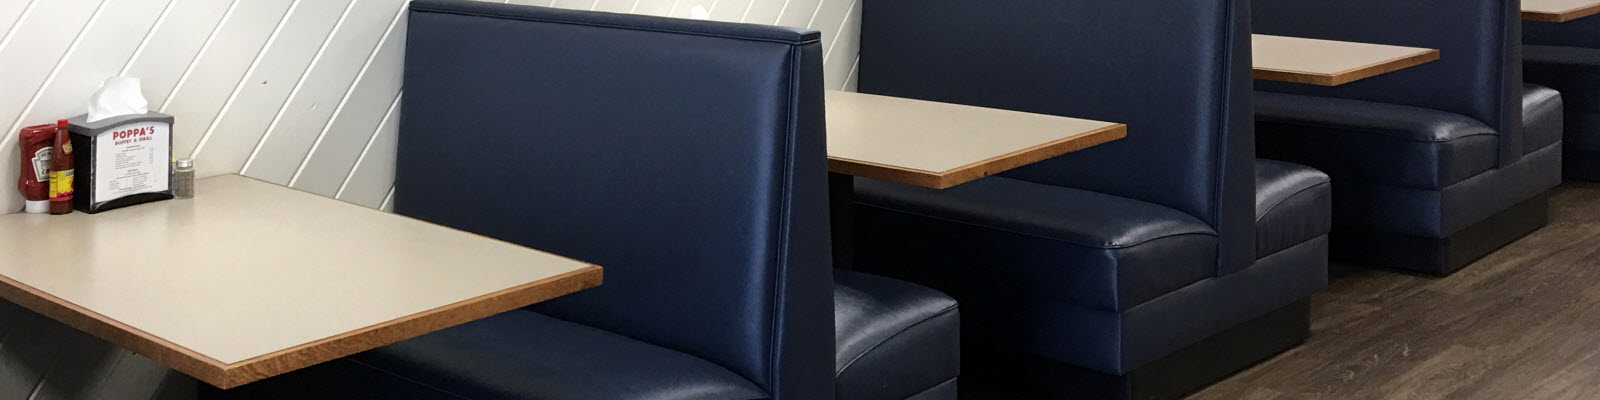 Restaurant Booth Seating Available in Any Colour and Size for 